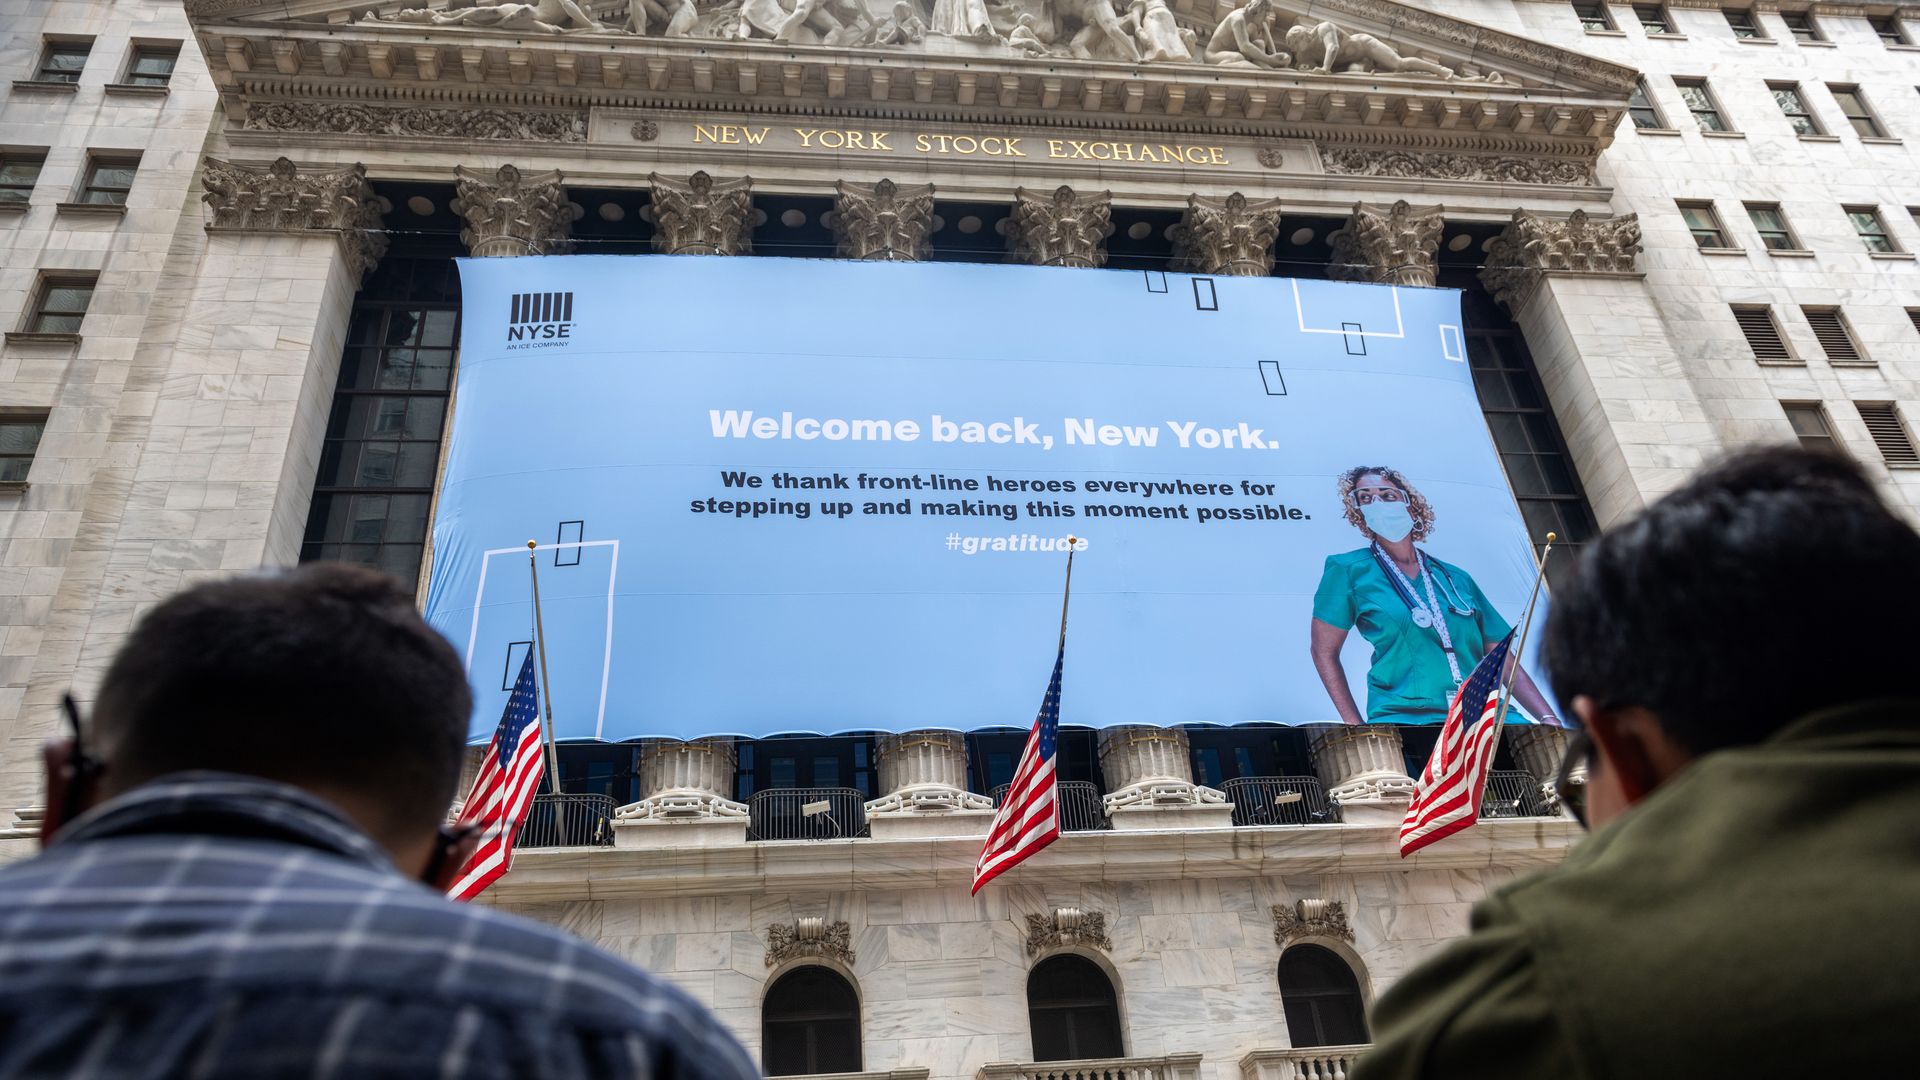 A "Welcome Back, New York, we thank front-line heroes everywhere for stepping up and making this moment possible" banner hangs outside the New York Stock Exchange 